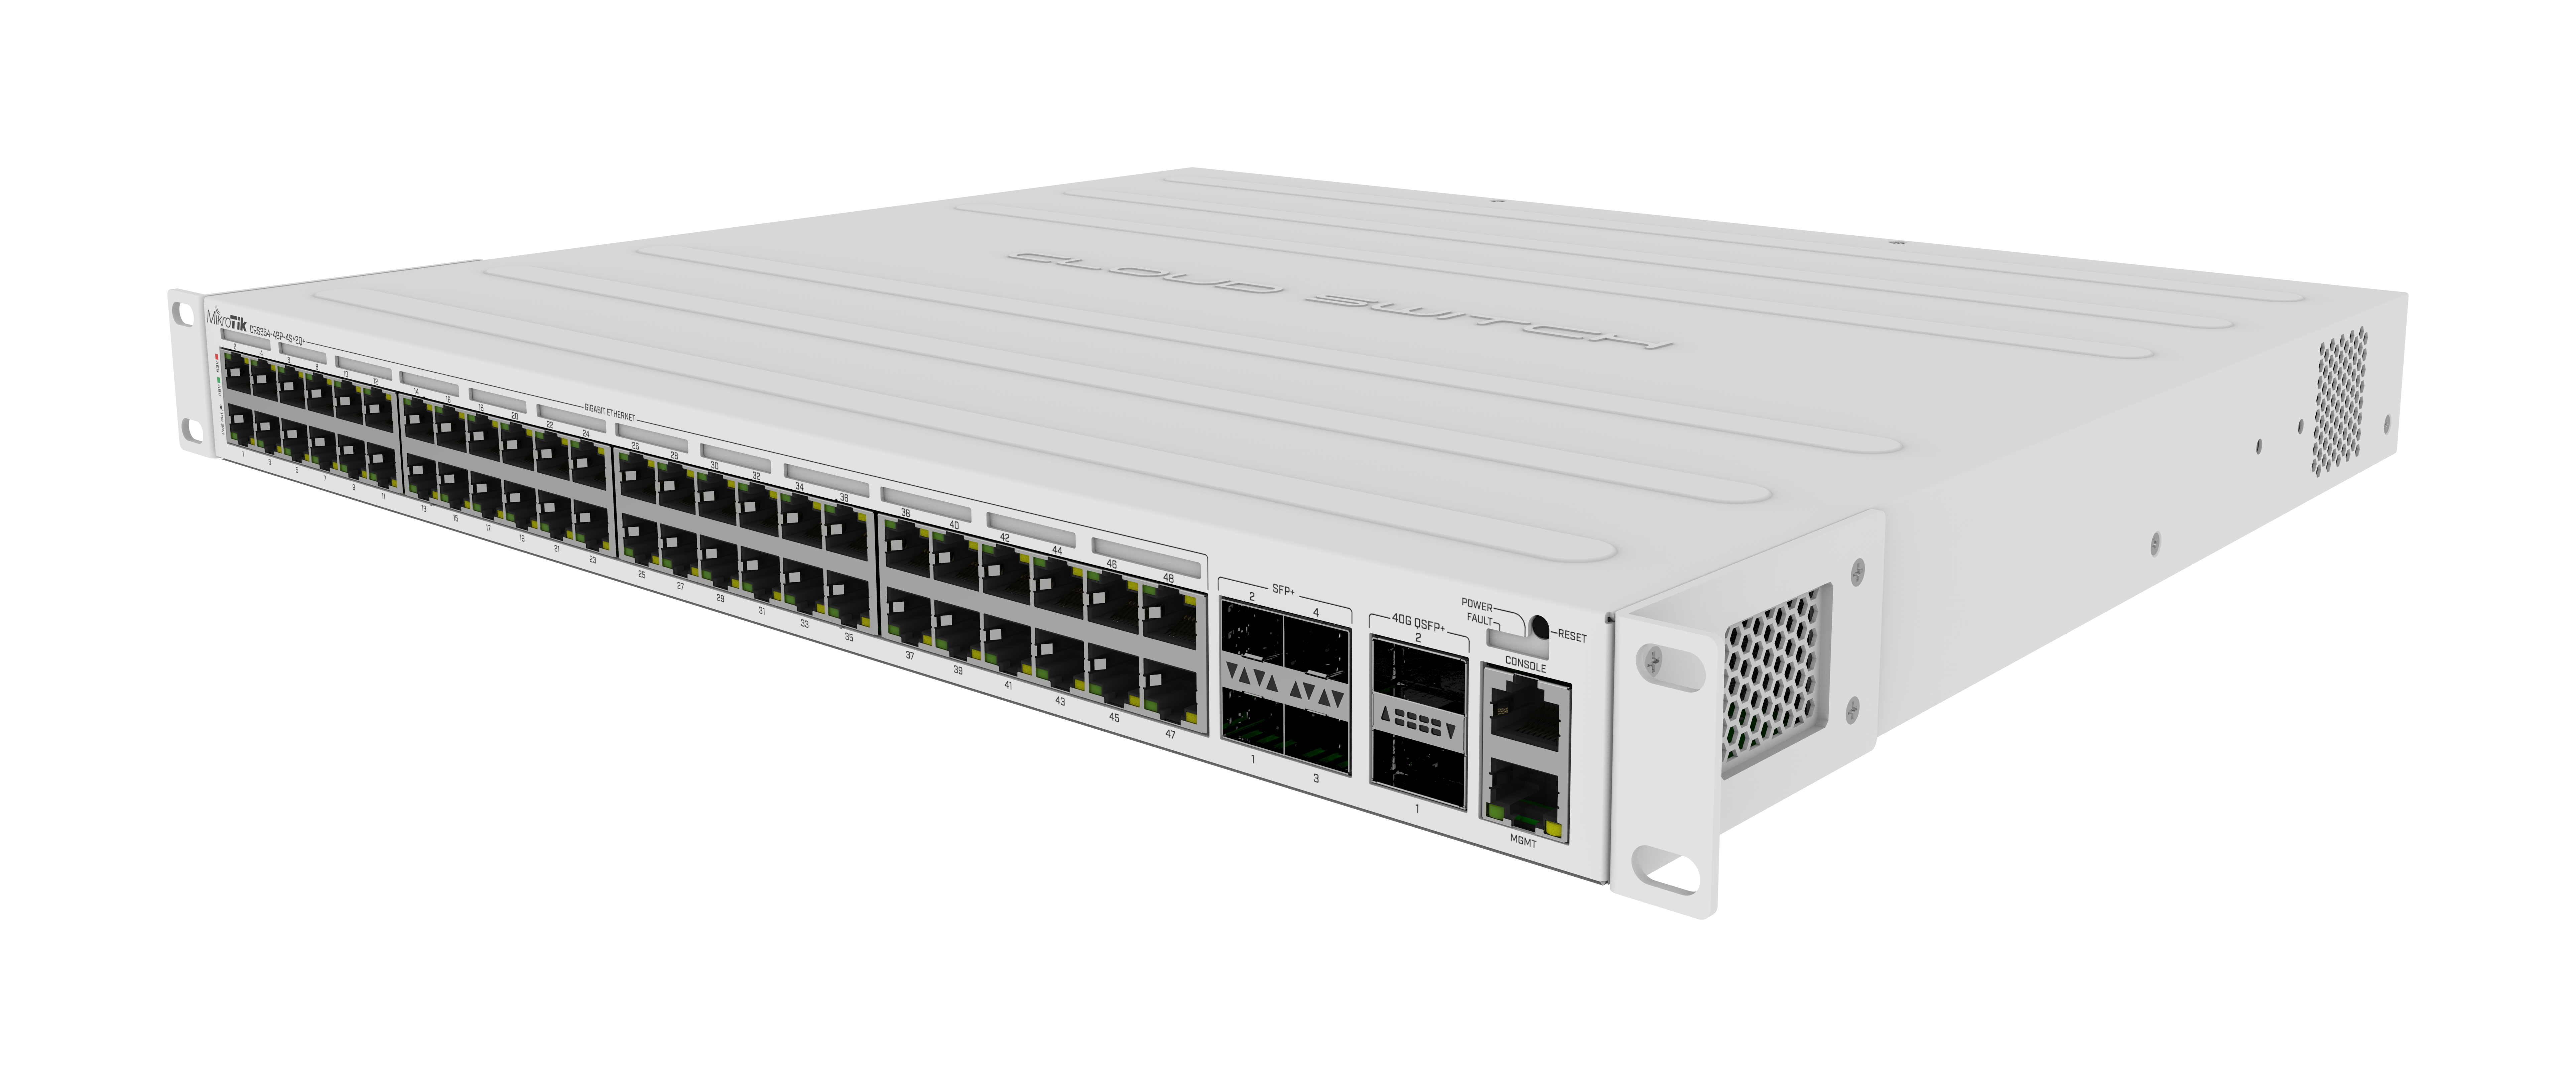 MikroTik Routers and Wireless - Products: CRS354-48P-4S+2Q+RM